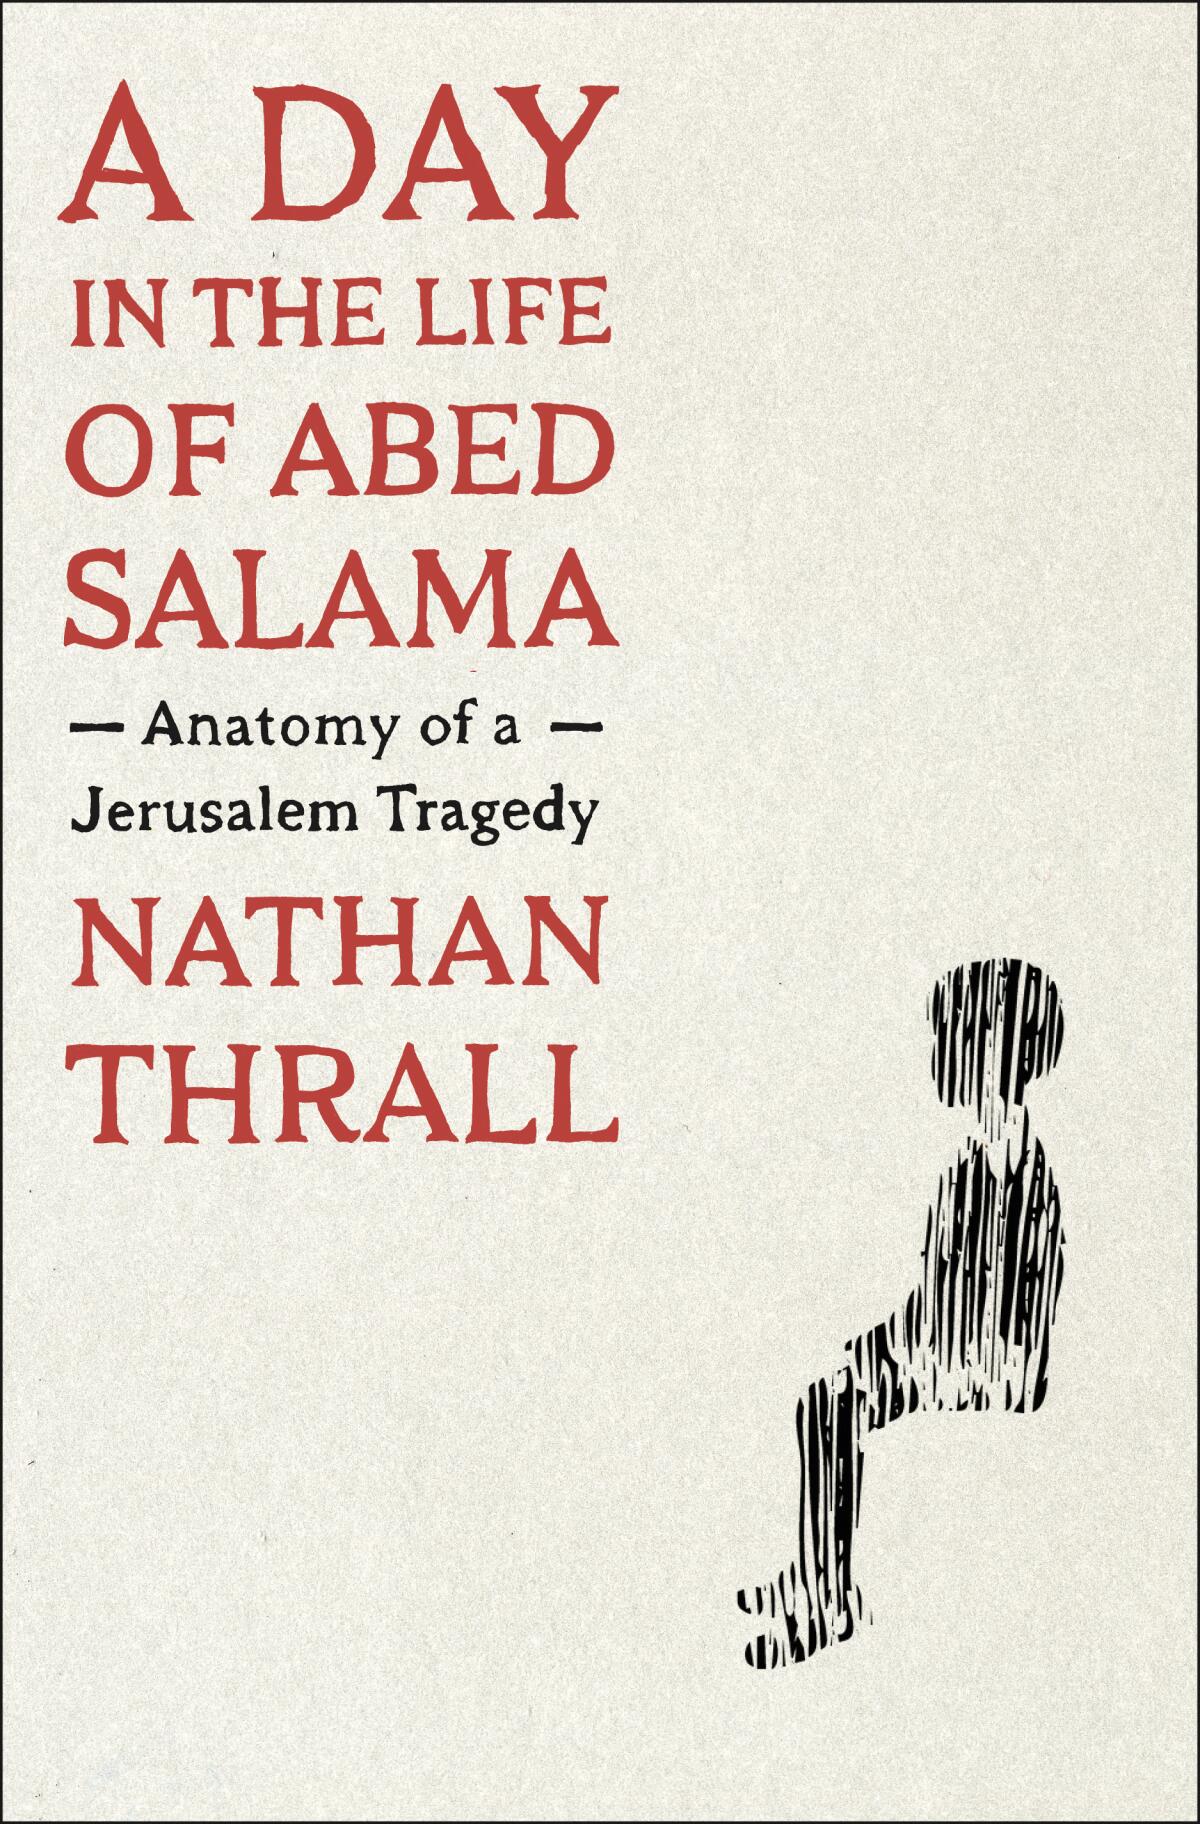 The book "A Day in the Life of Amed Salama," by Nathan Thrall